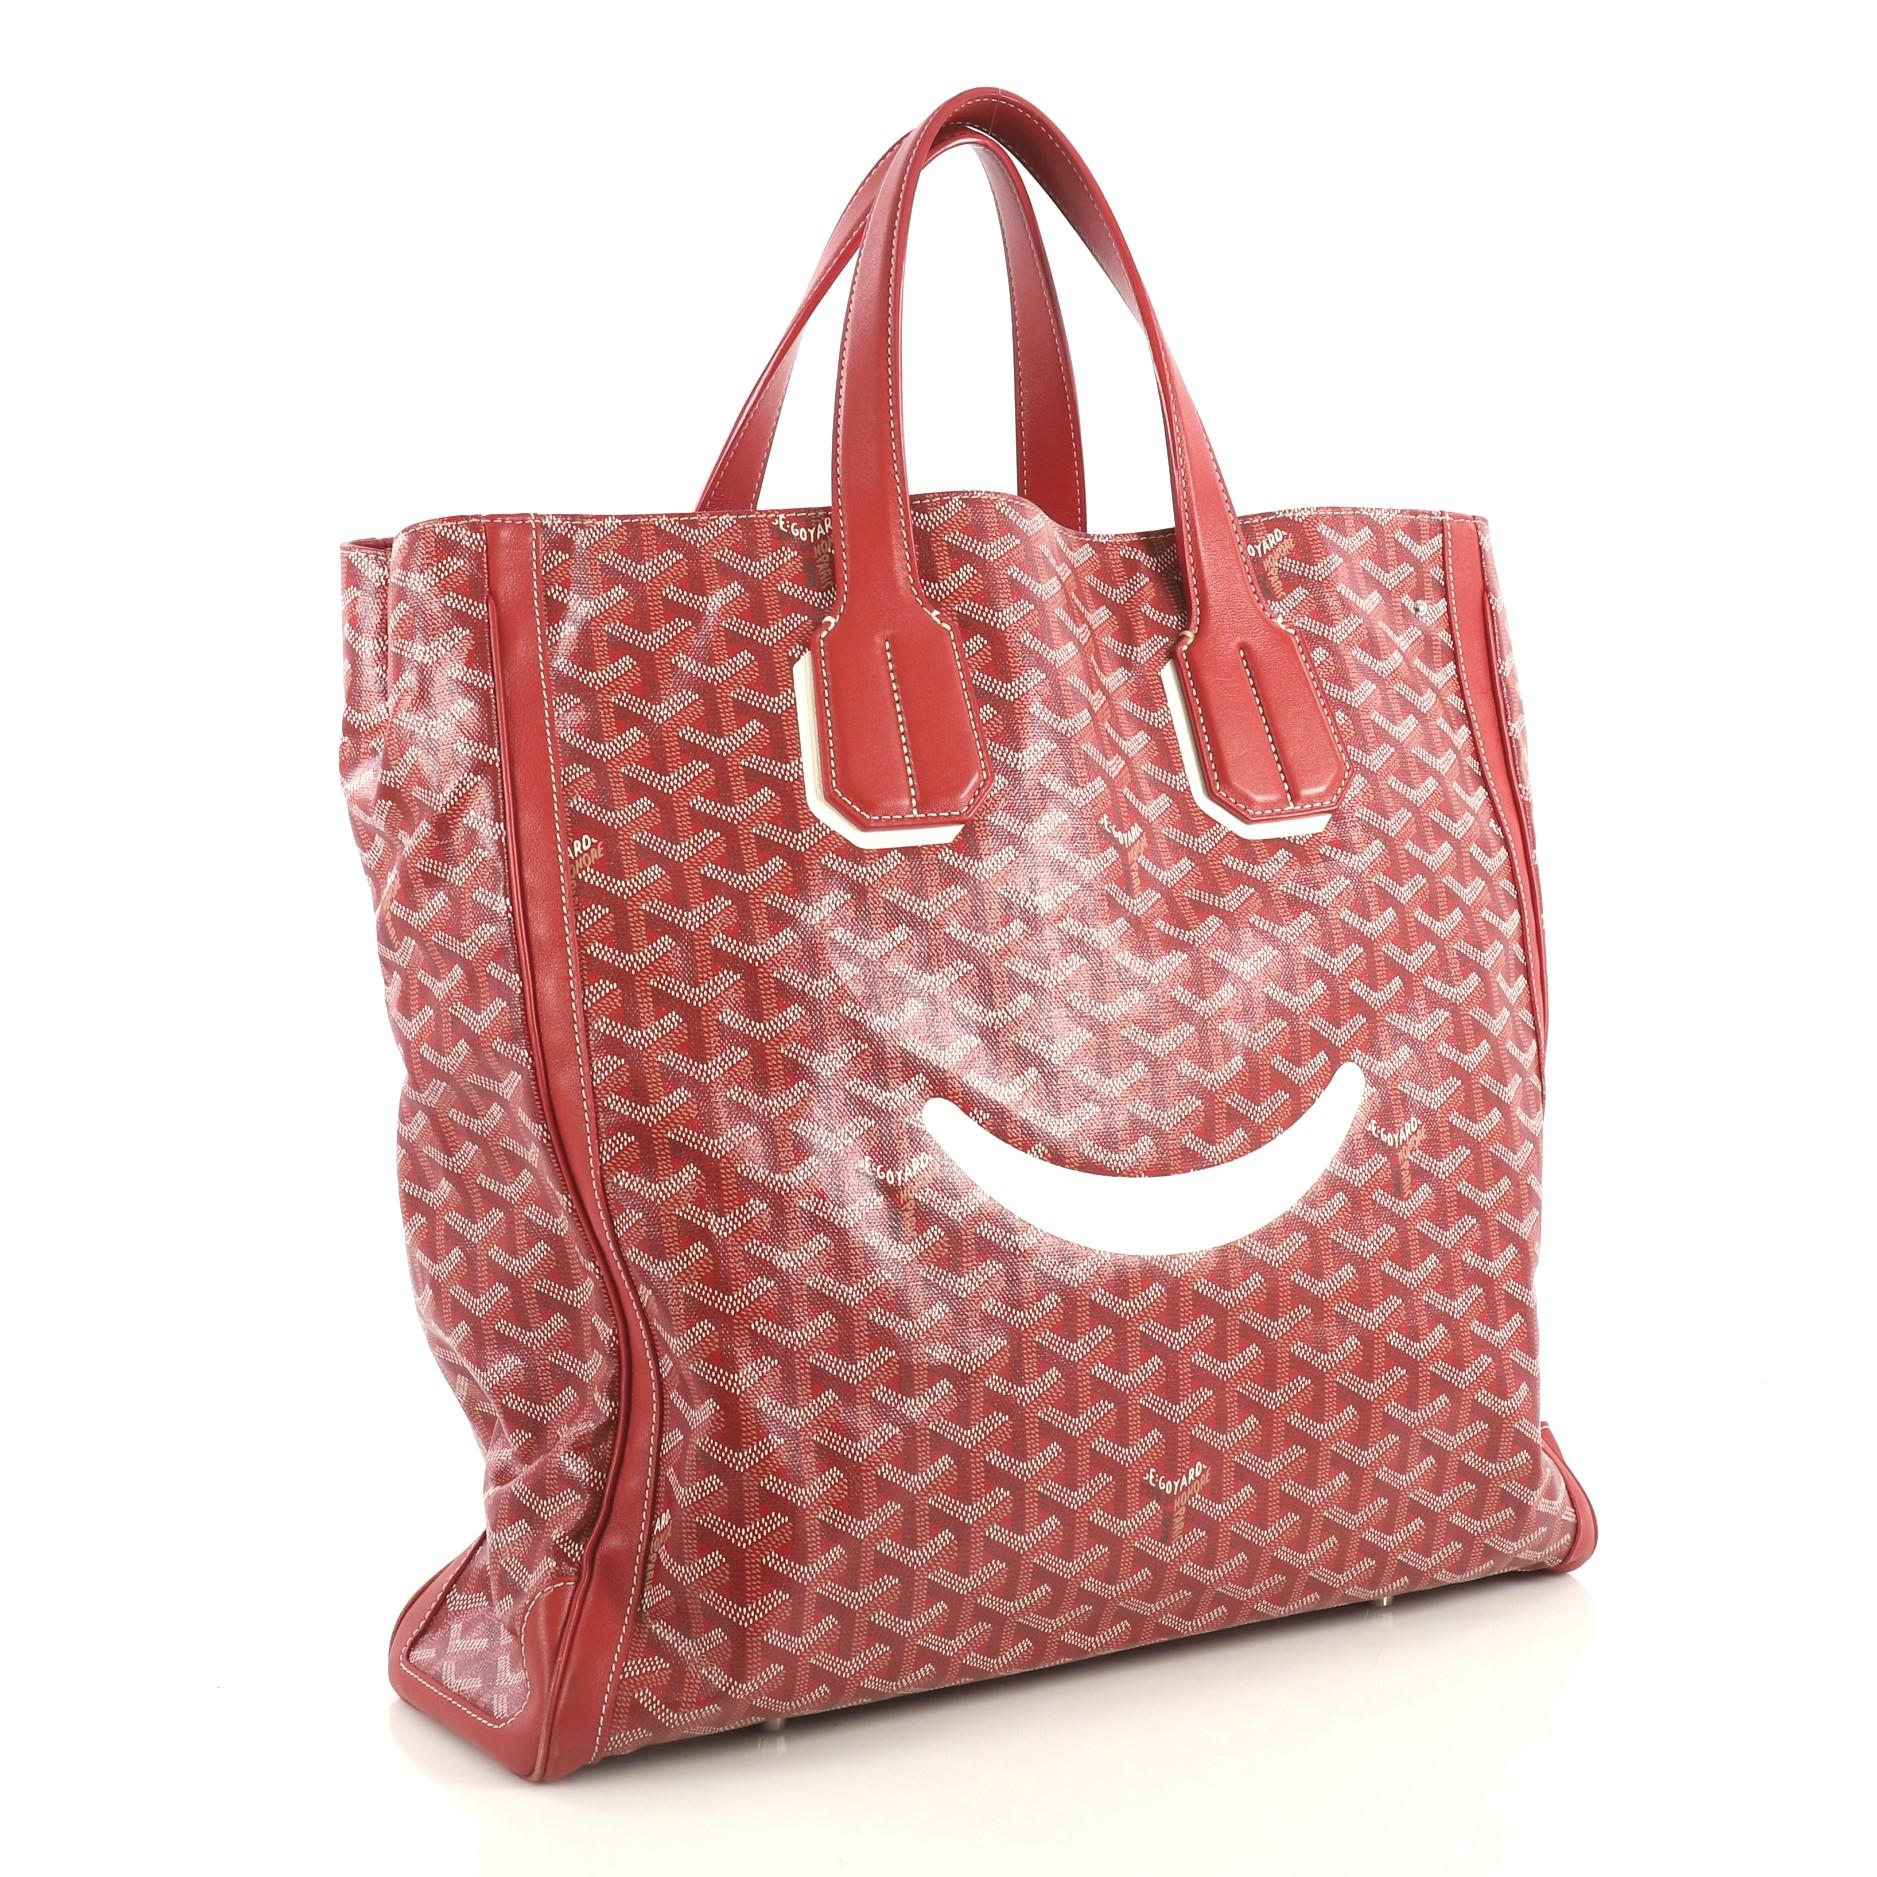 This Goyard Voltaire Convertible Tote Painted Coated Canvas, crafted from red coated canvas, features dual flat leather handles, protective base studs, smiley face accent at front, and silver-tone hardware. Its open top with middle hook closure